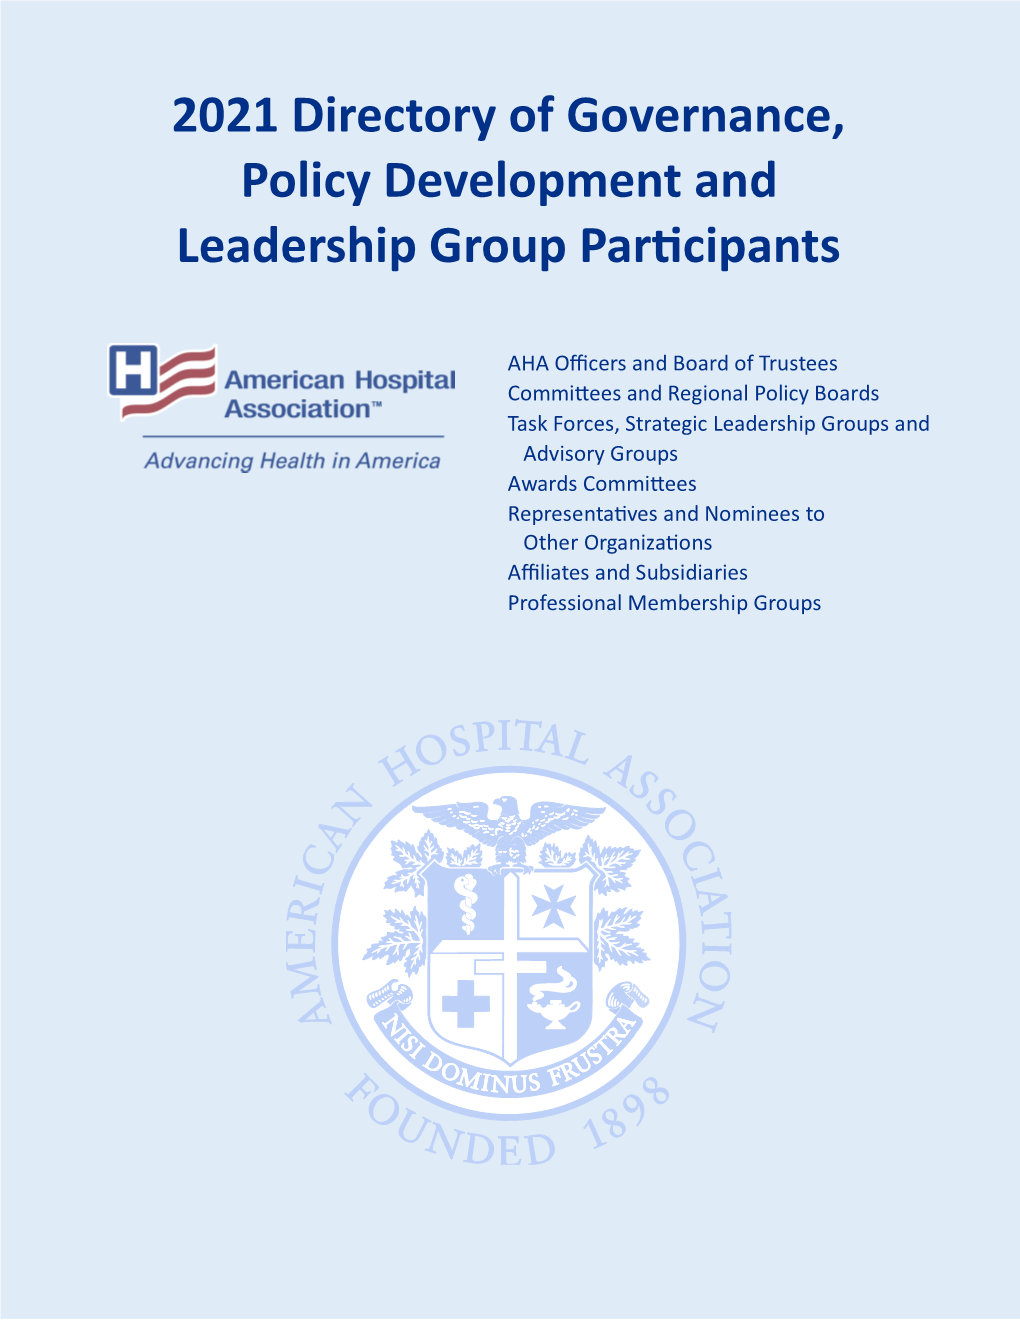 2021 Directory of Governance, Policy Development and Leadership Group Participants